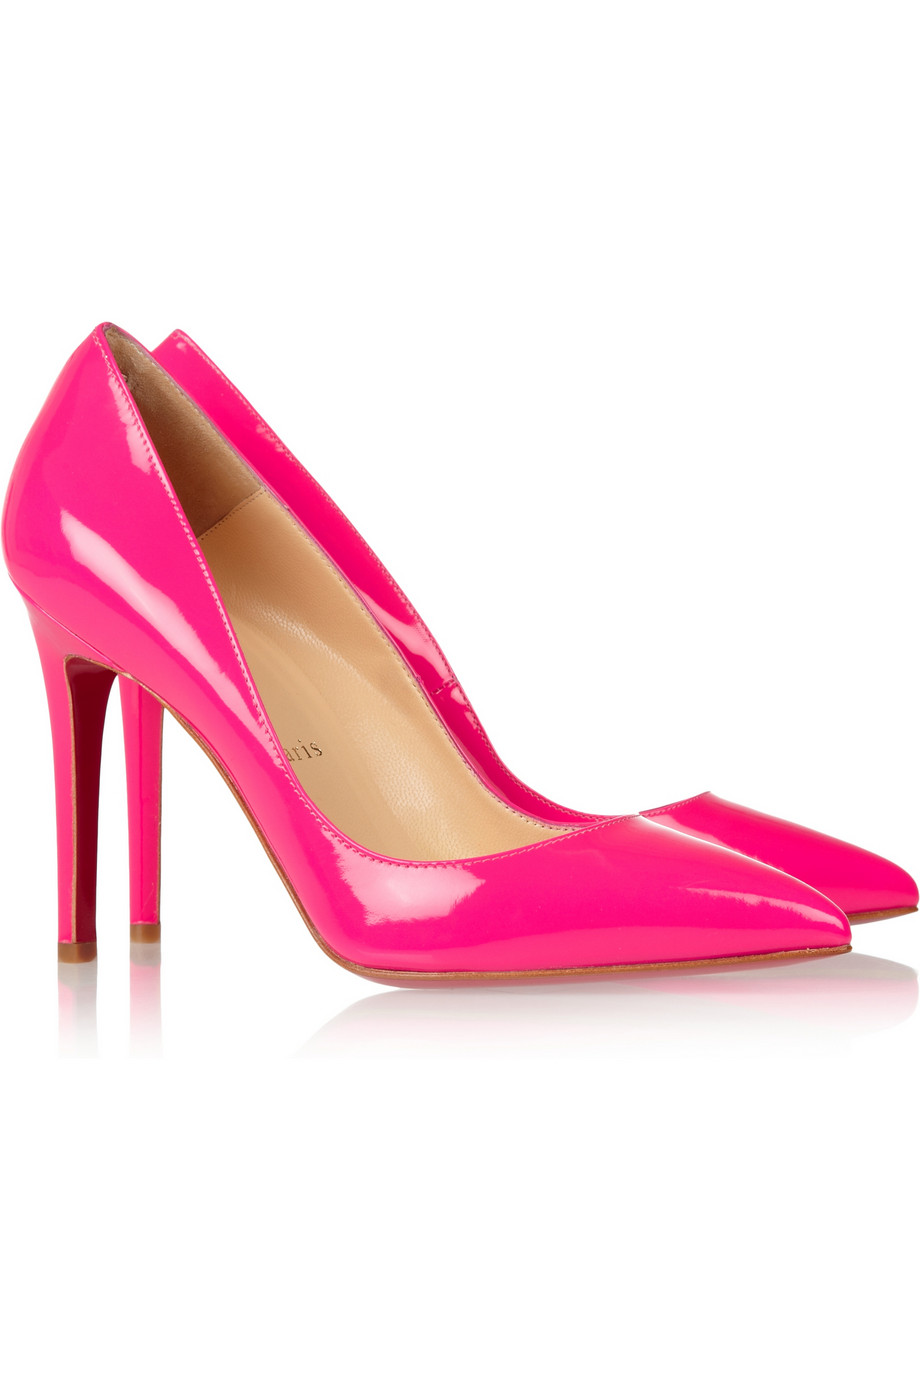 Christian louboutin The Pigalle Pumps in Pink (rose) | Lyst